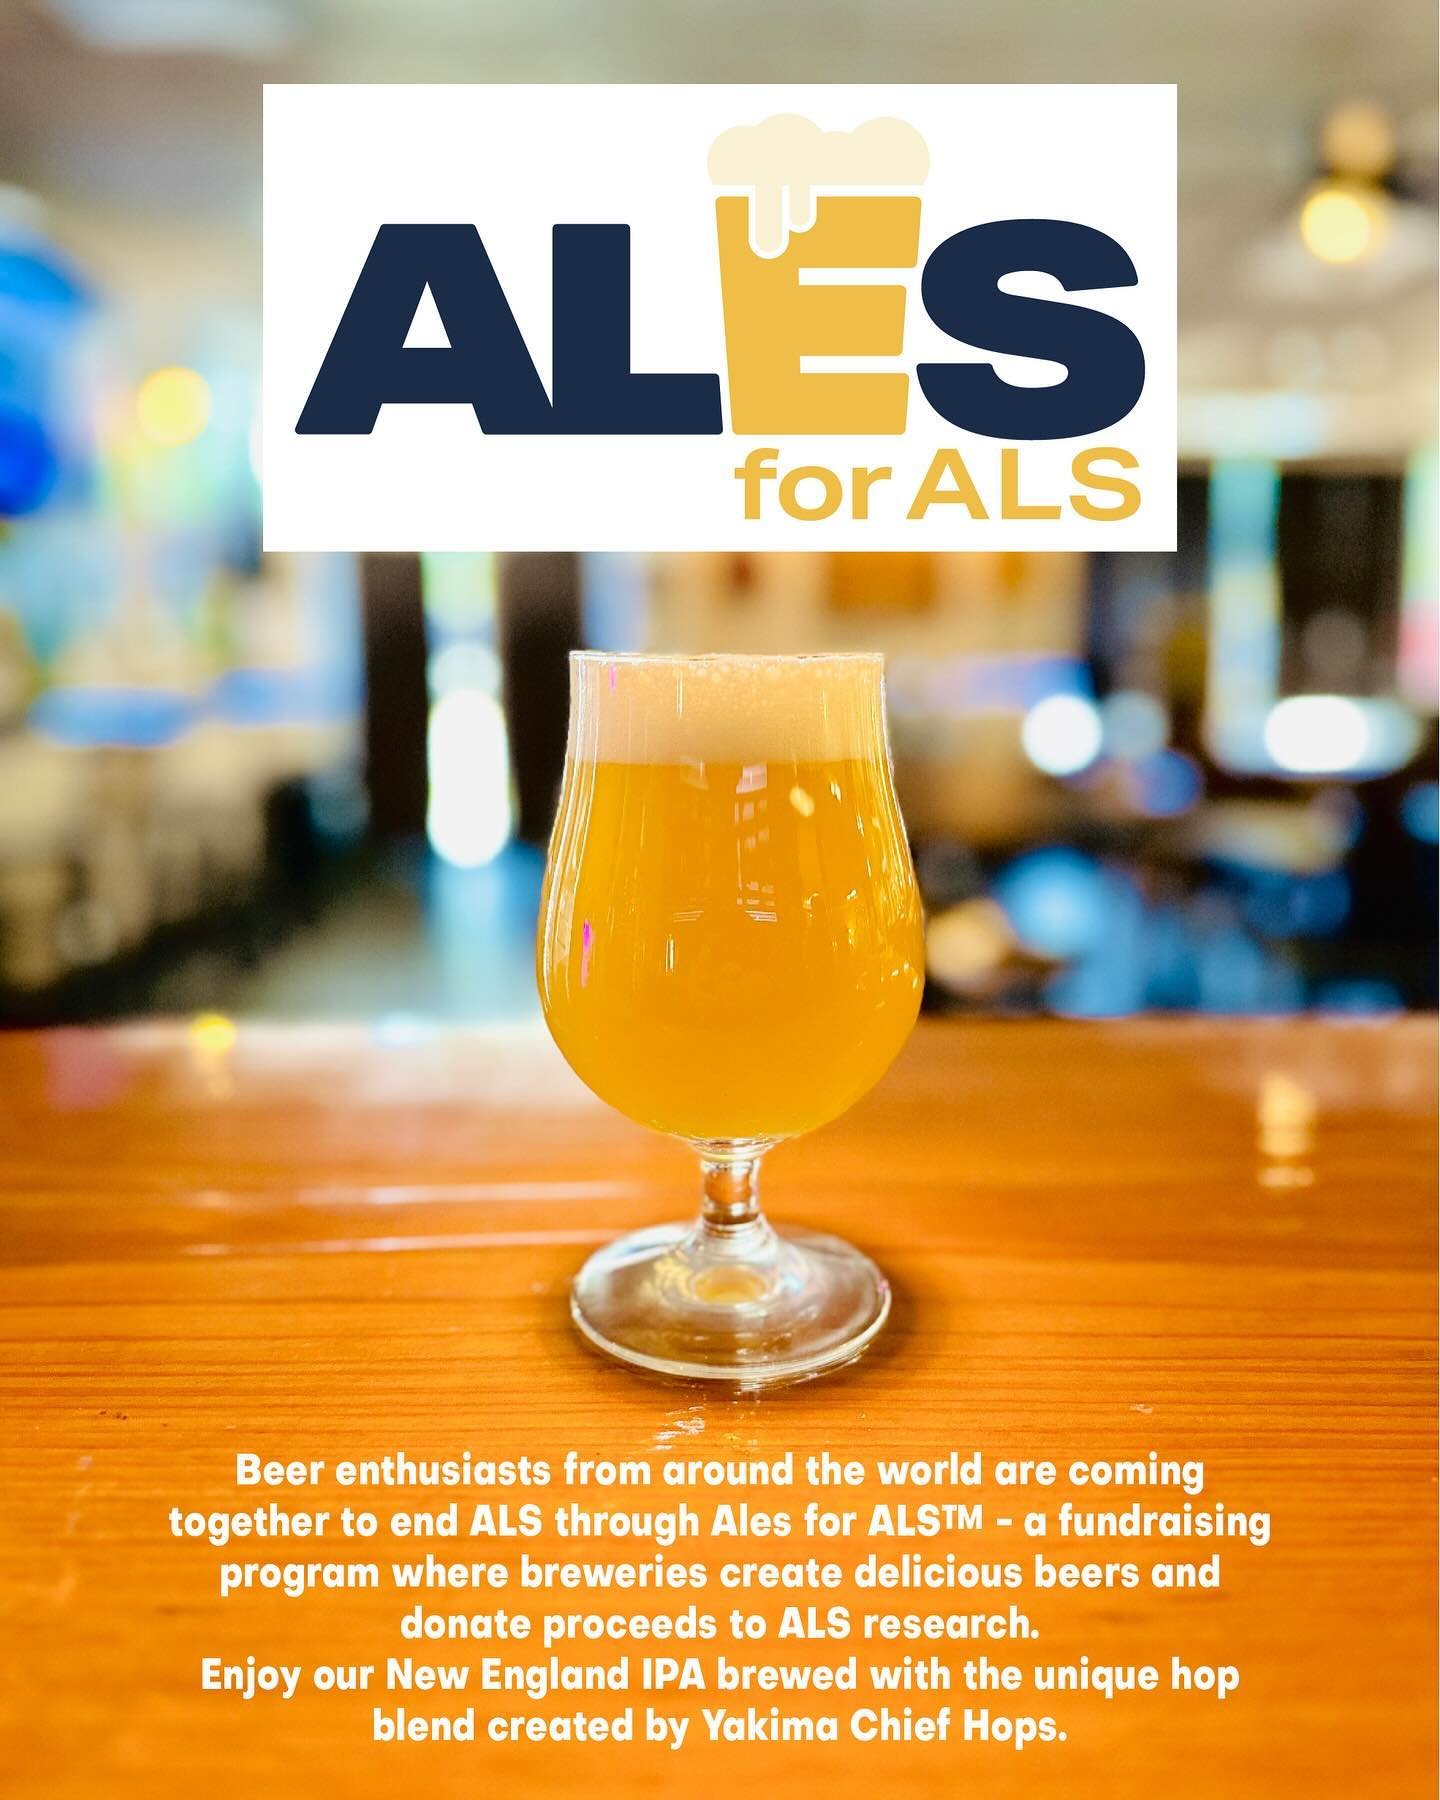 *New Beer Release!

Great Beer. Great Cause.
Beer enthusiasts from around the world are coming together to end ALS through Ales for ALS&trade; - a fundraising program where breweries create delicious beers and donate proceeds to ALS research.

$1 fro